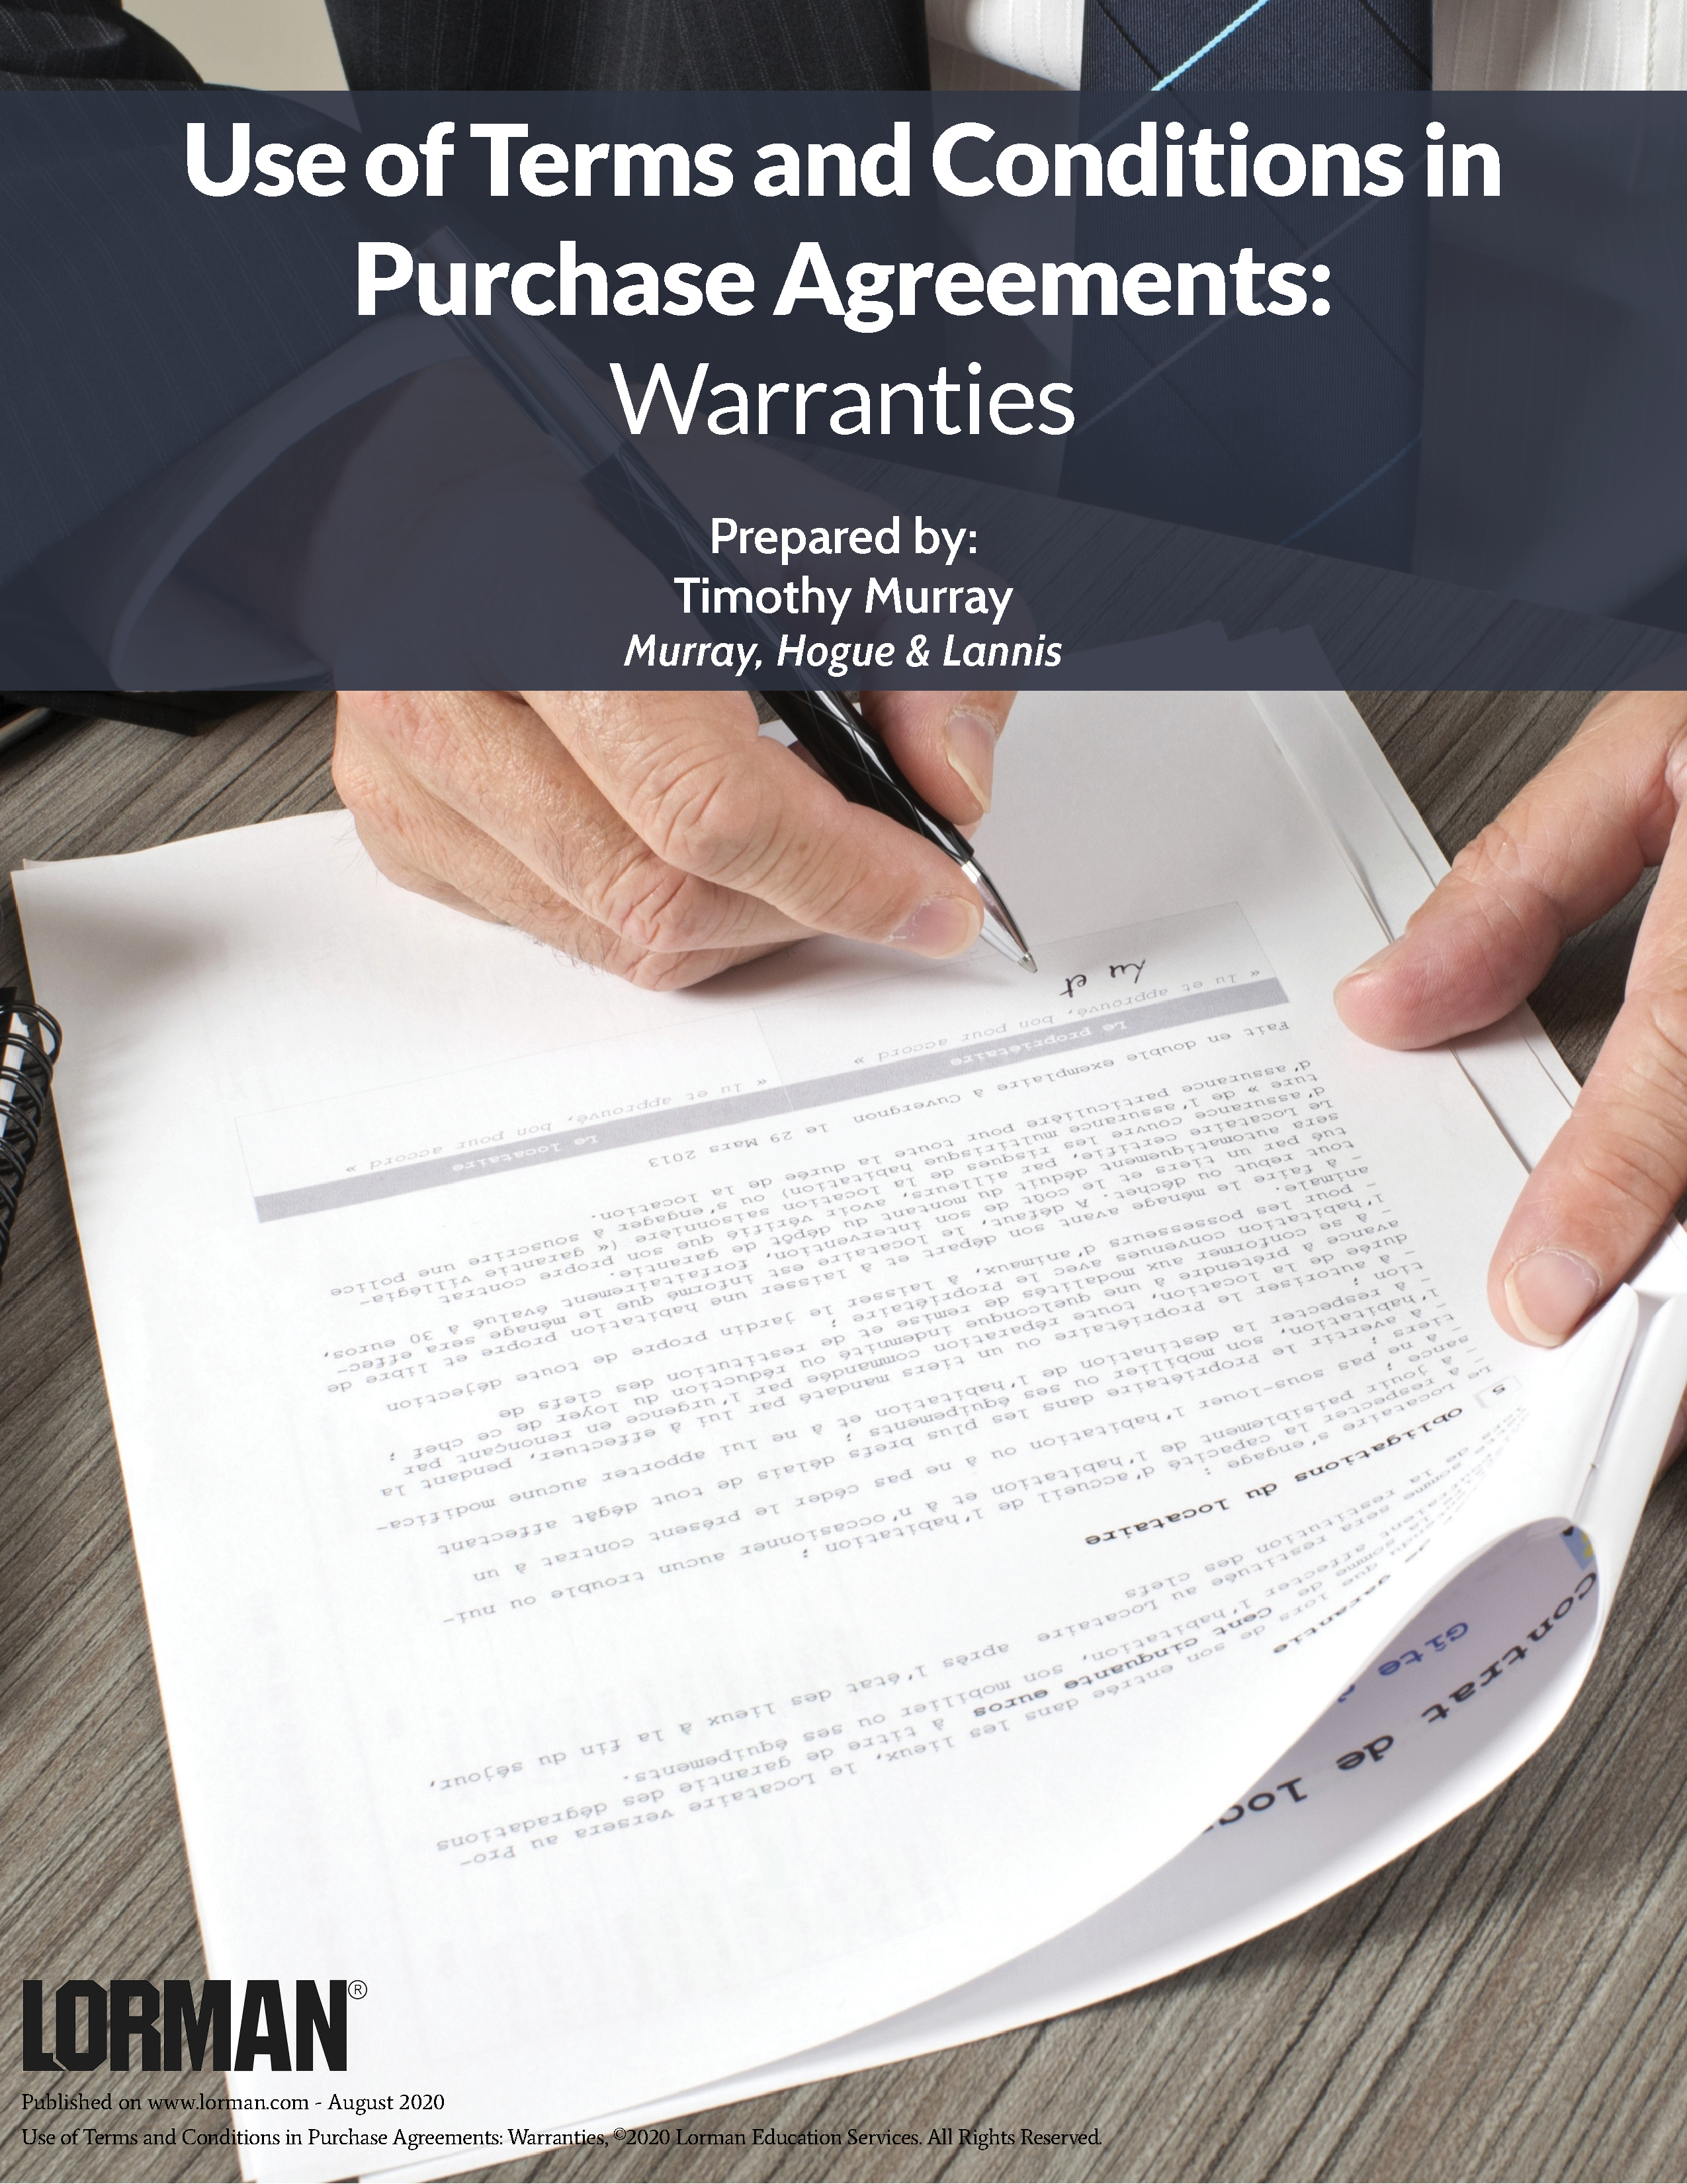 Use of Terms and Conditions in Purchase Agreements: Warranties